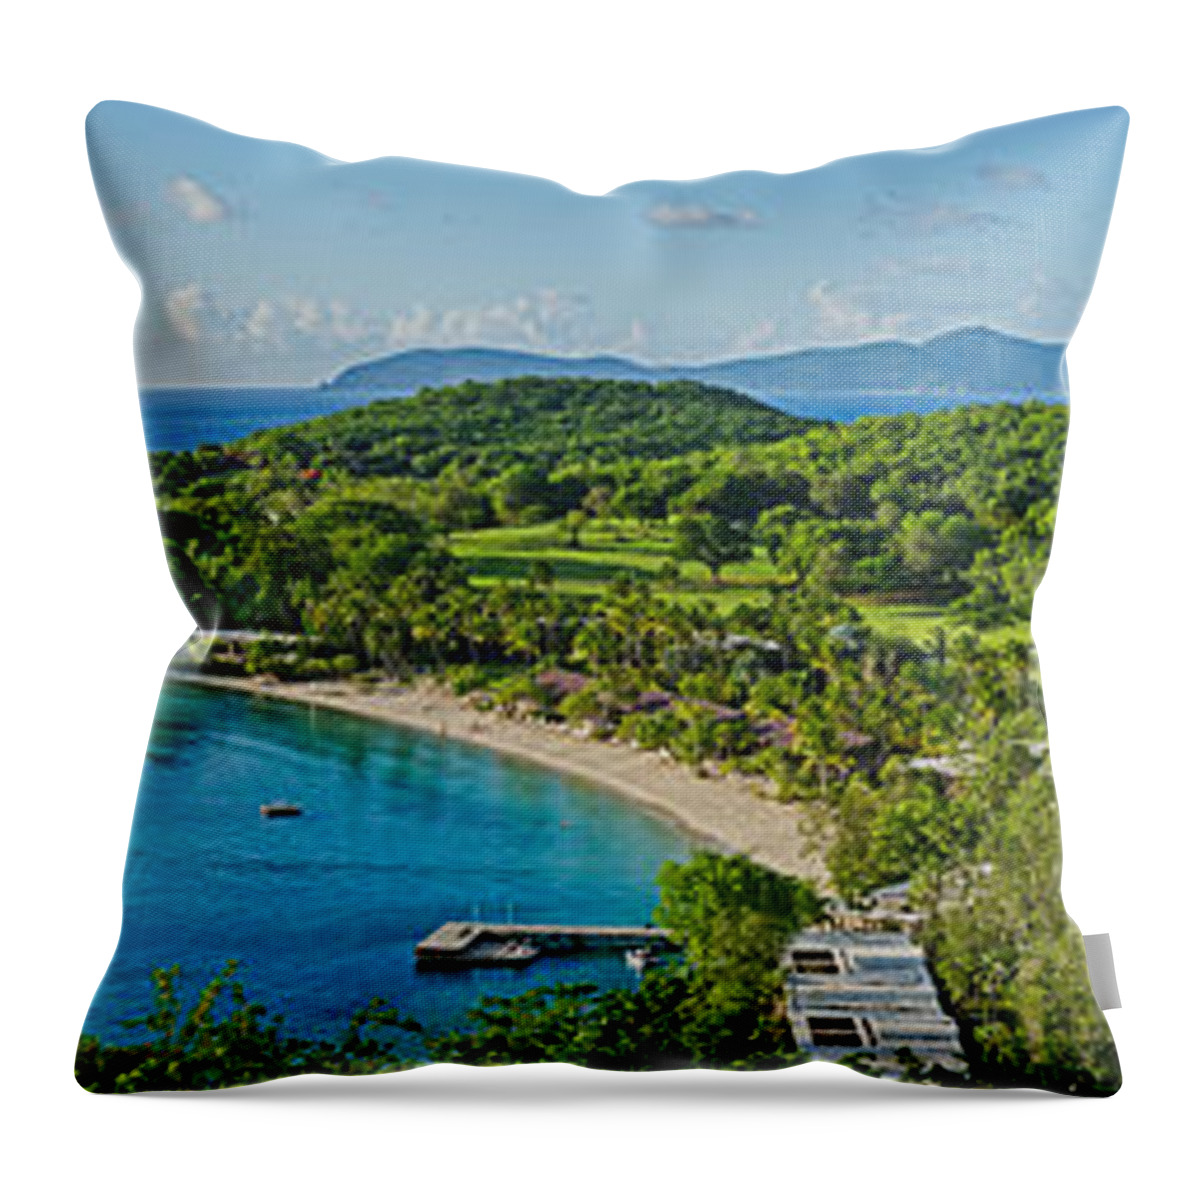 Photography Throw Pillow featuring the photograph Rosewood Resort On An Island, Caneel by Panoramic Images